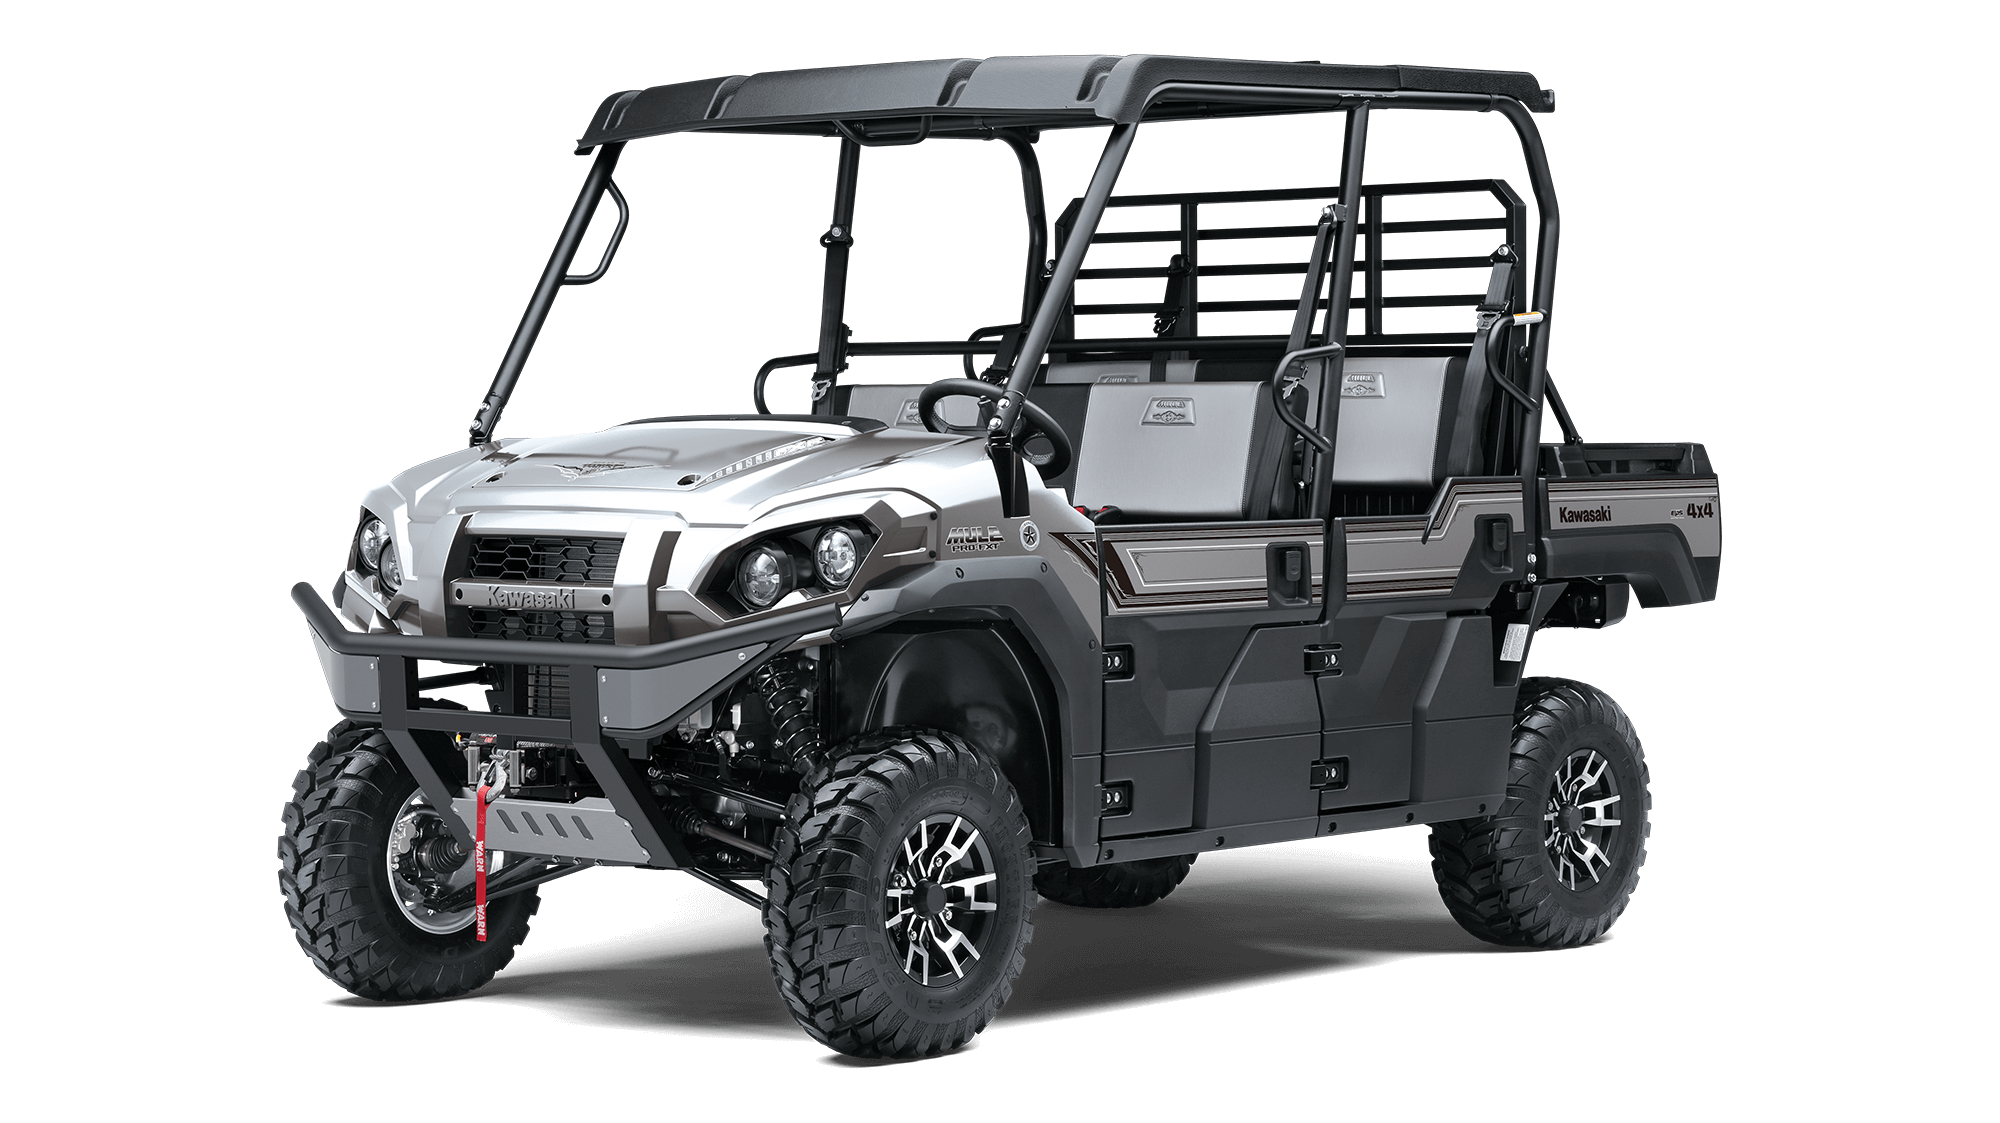 MULE PRO-FXT RANCH EDITION Image